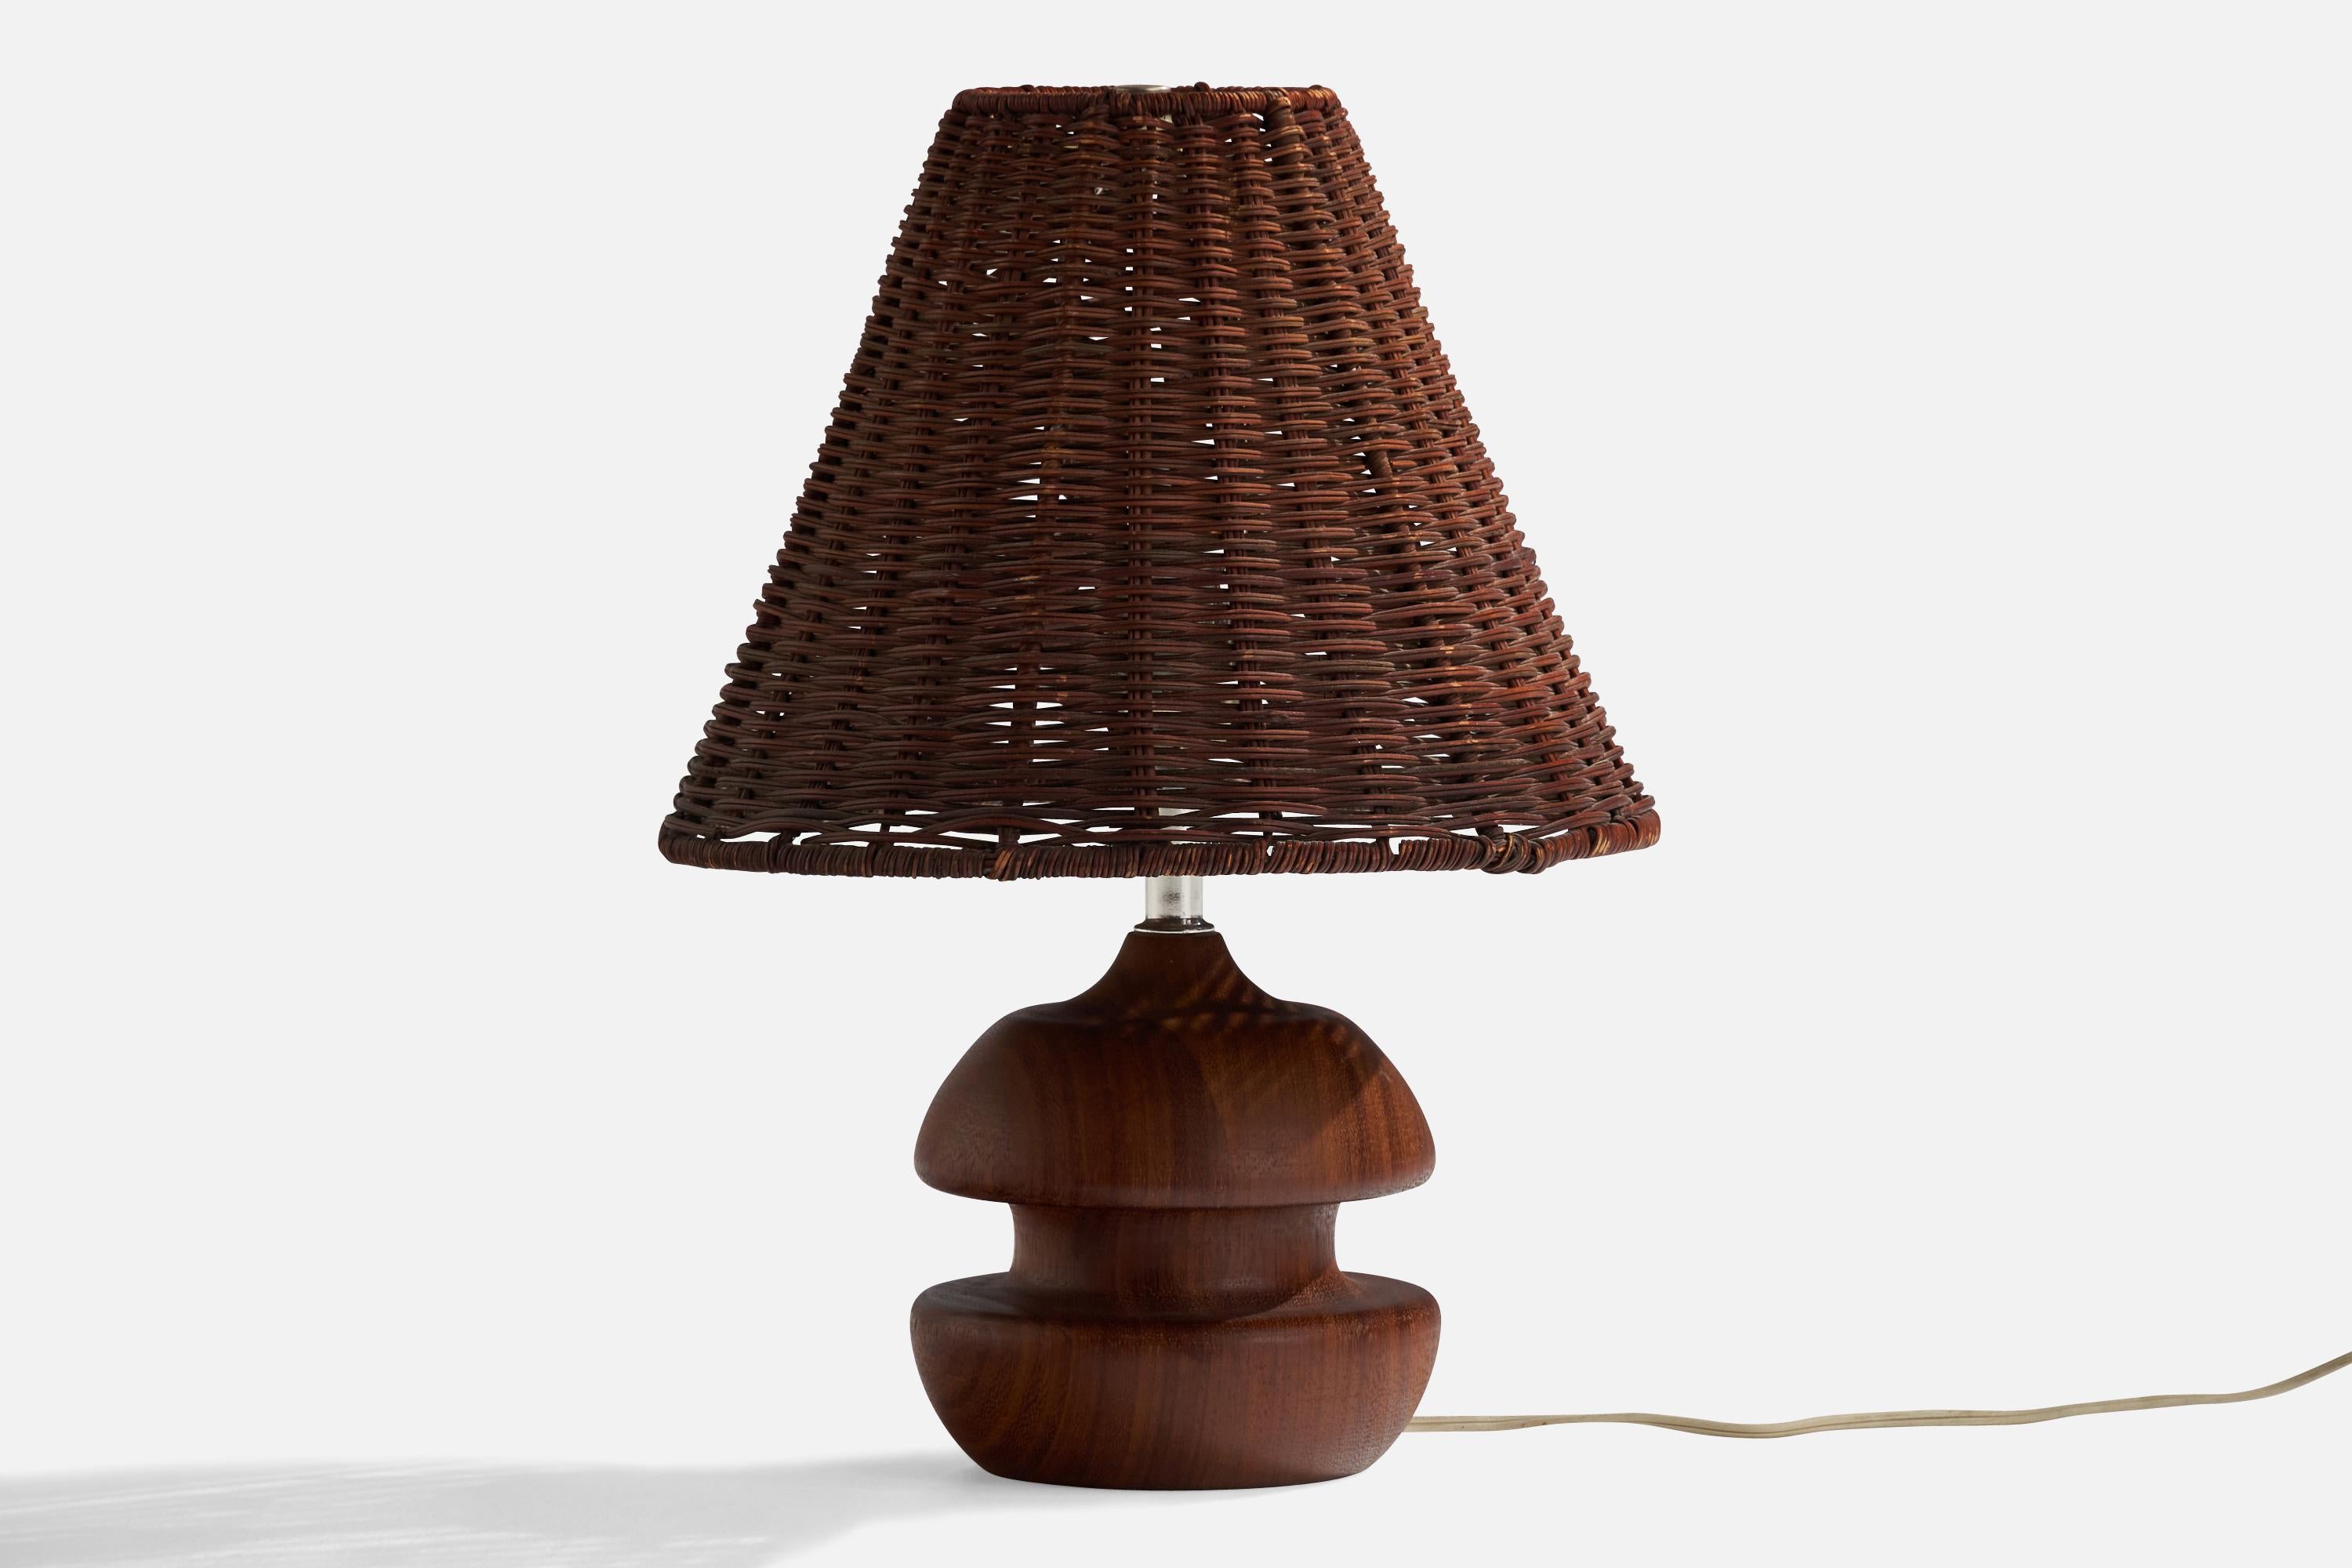 A teak, brass and rattan table lamp designed and produced in the US, 1960s.

Overall Dimensions (inches): 15.25” H x 11.25” Diameter
Stated dimensions include shade.
Bulb Specifications: E-26 Bulb
Number of Sockets: 1
All lighting will be converted